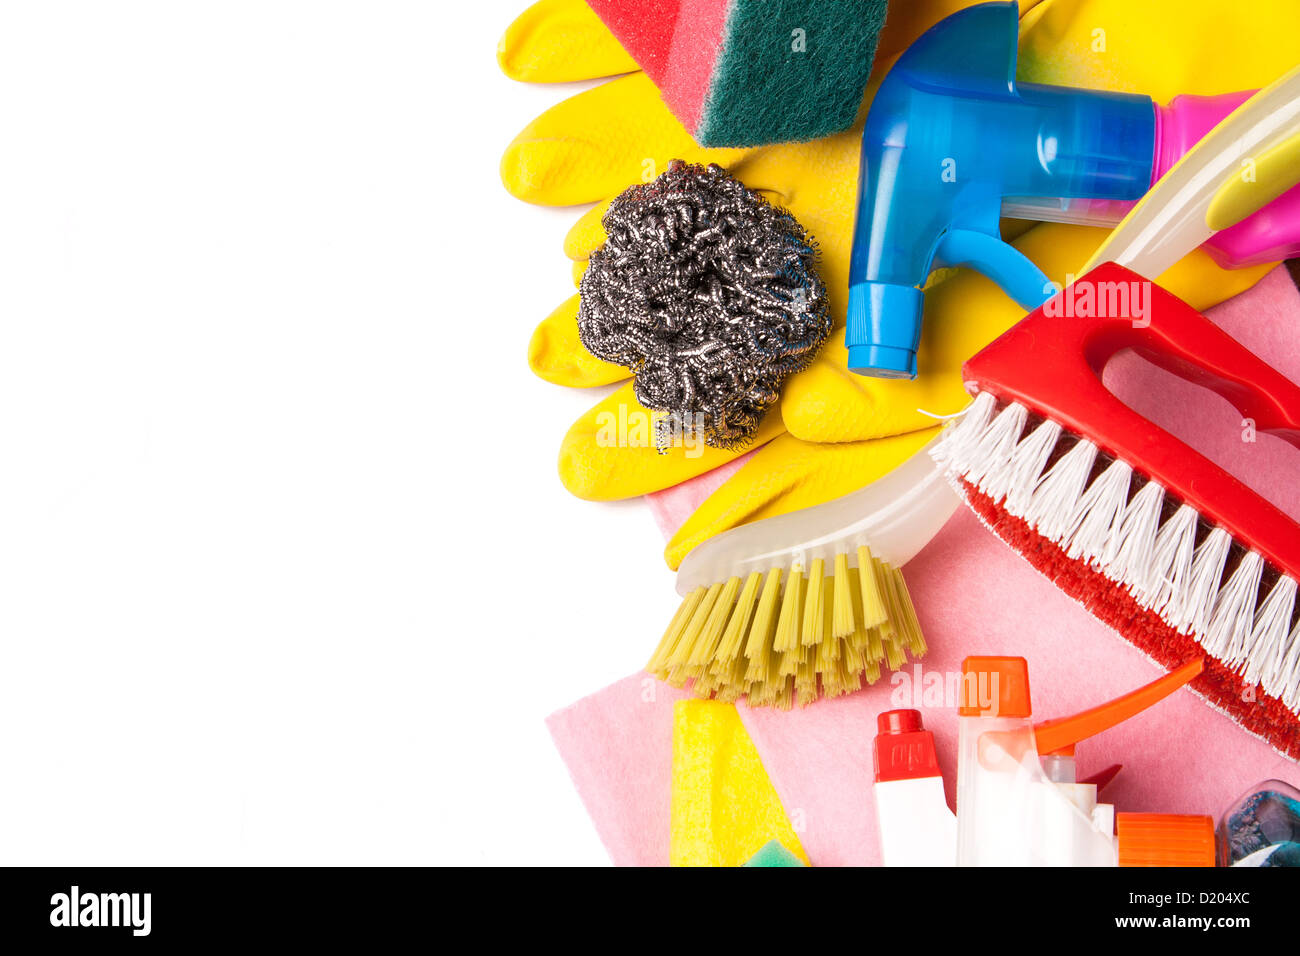 Assortment of colored means for cleaning and washing Stock Photo